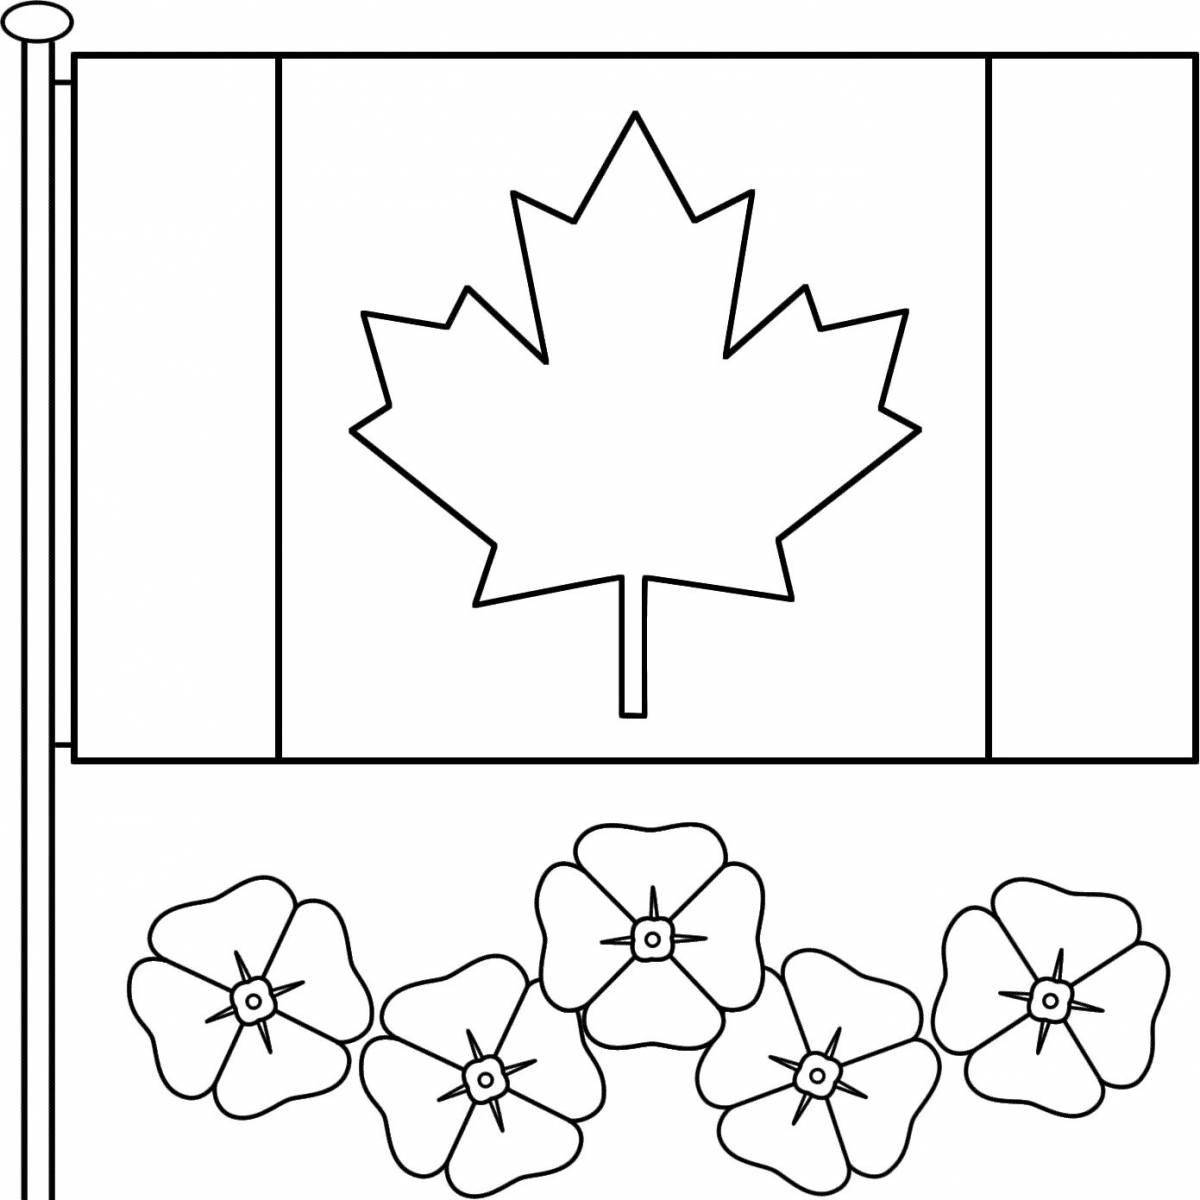 Large Canadian flag coloring page